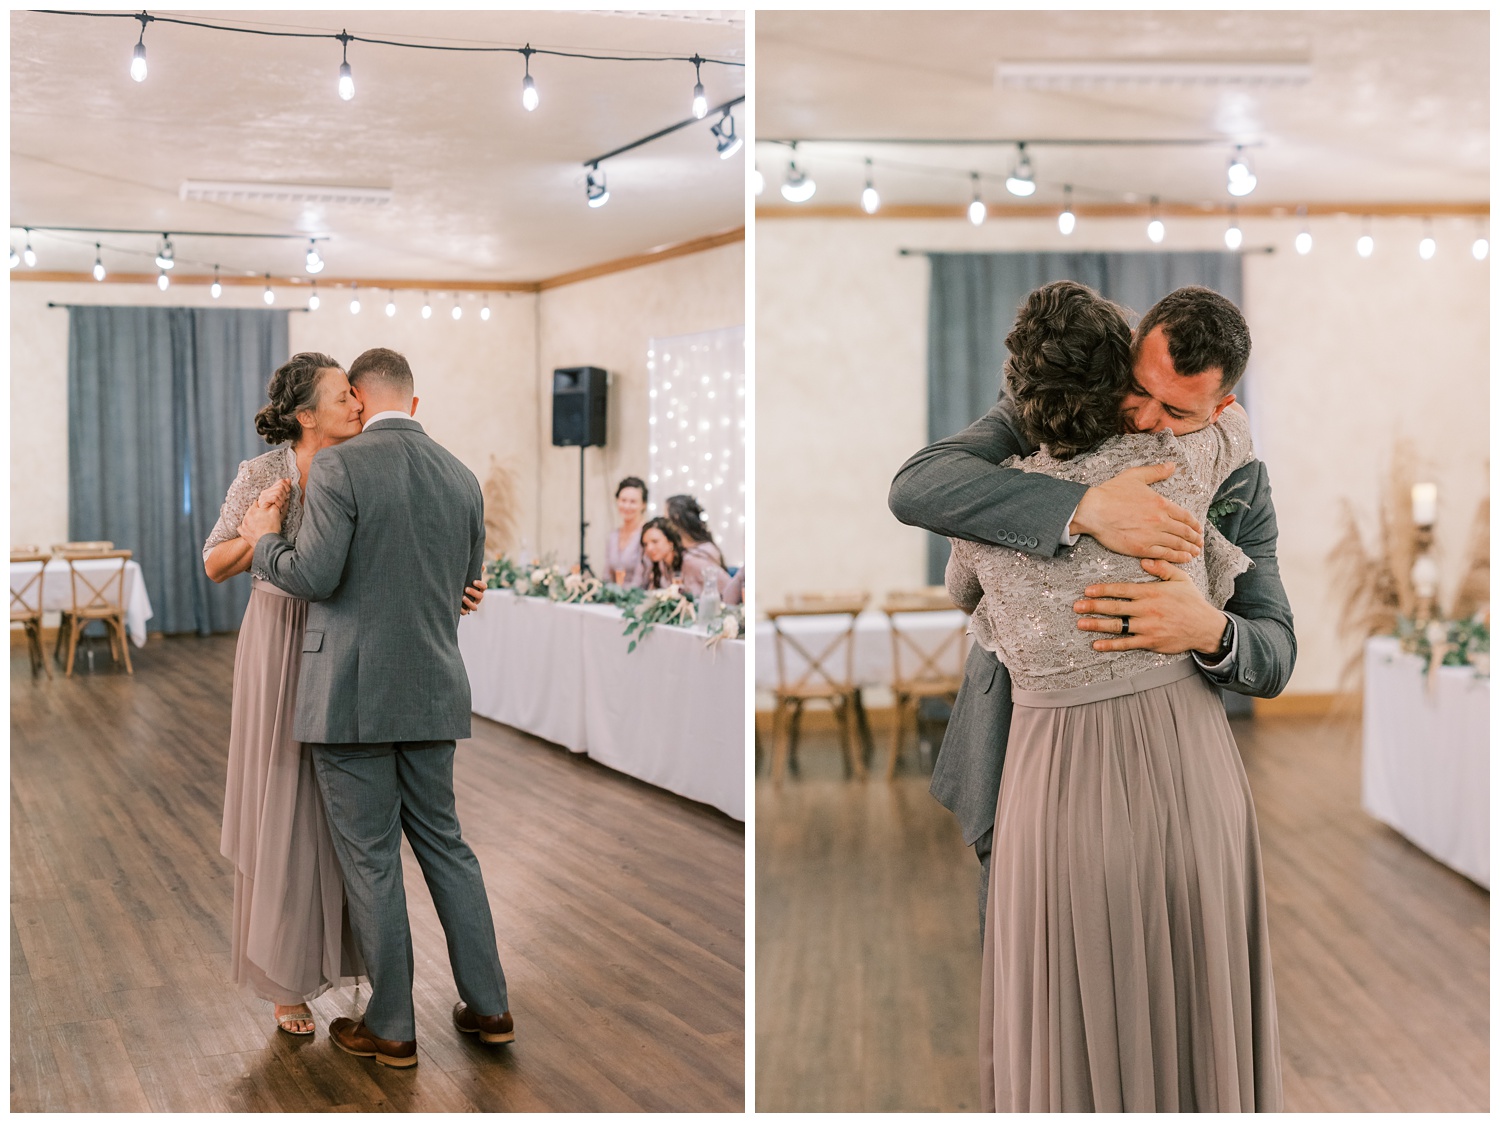 Mother and son first dance at Illinois wedding reception